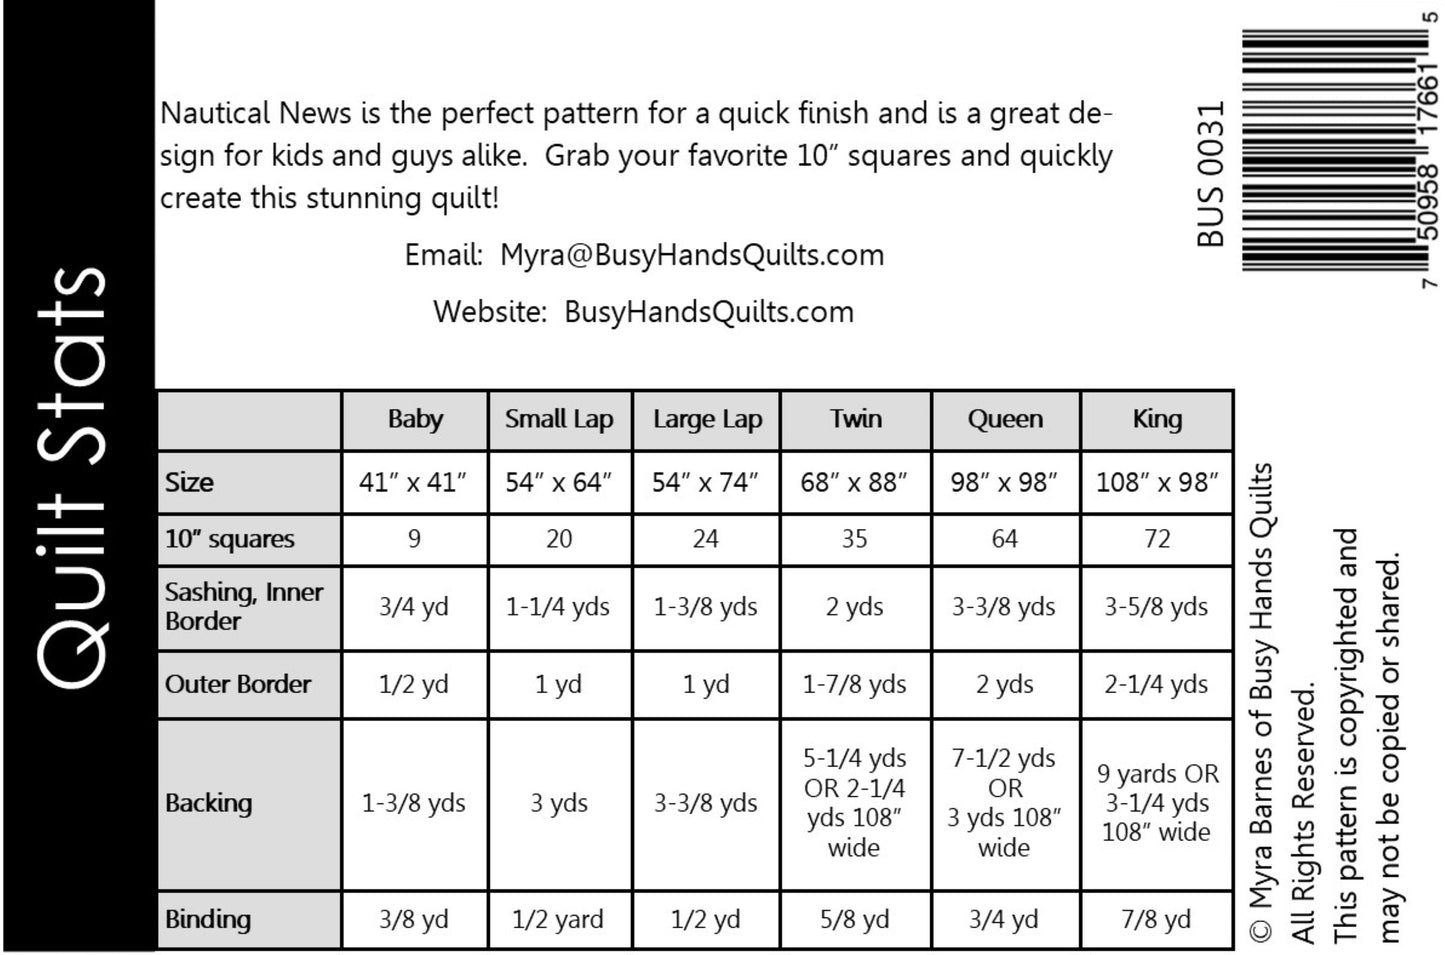 Nautical News Quilt Pattern PDF DOWNLOAD Busy Hands Quilts $12.99